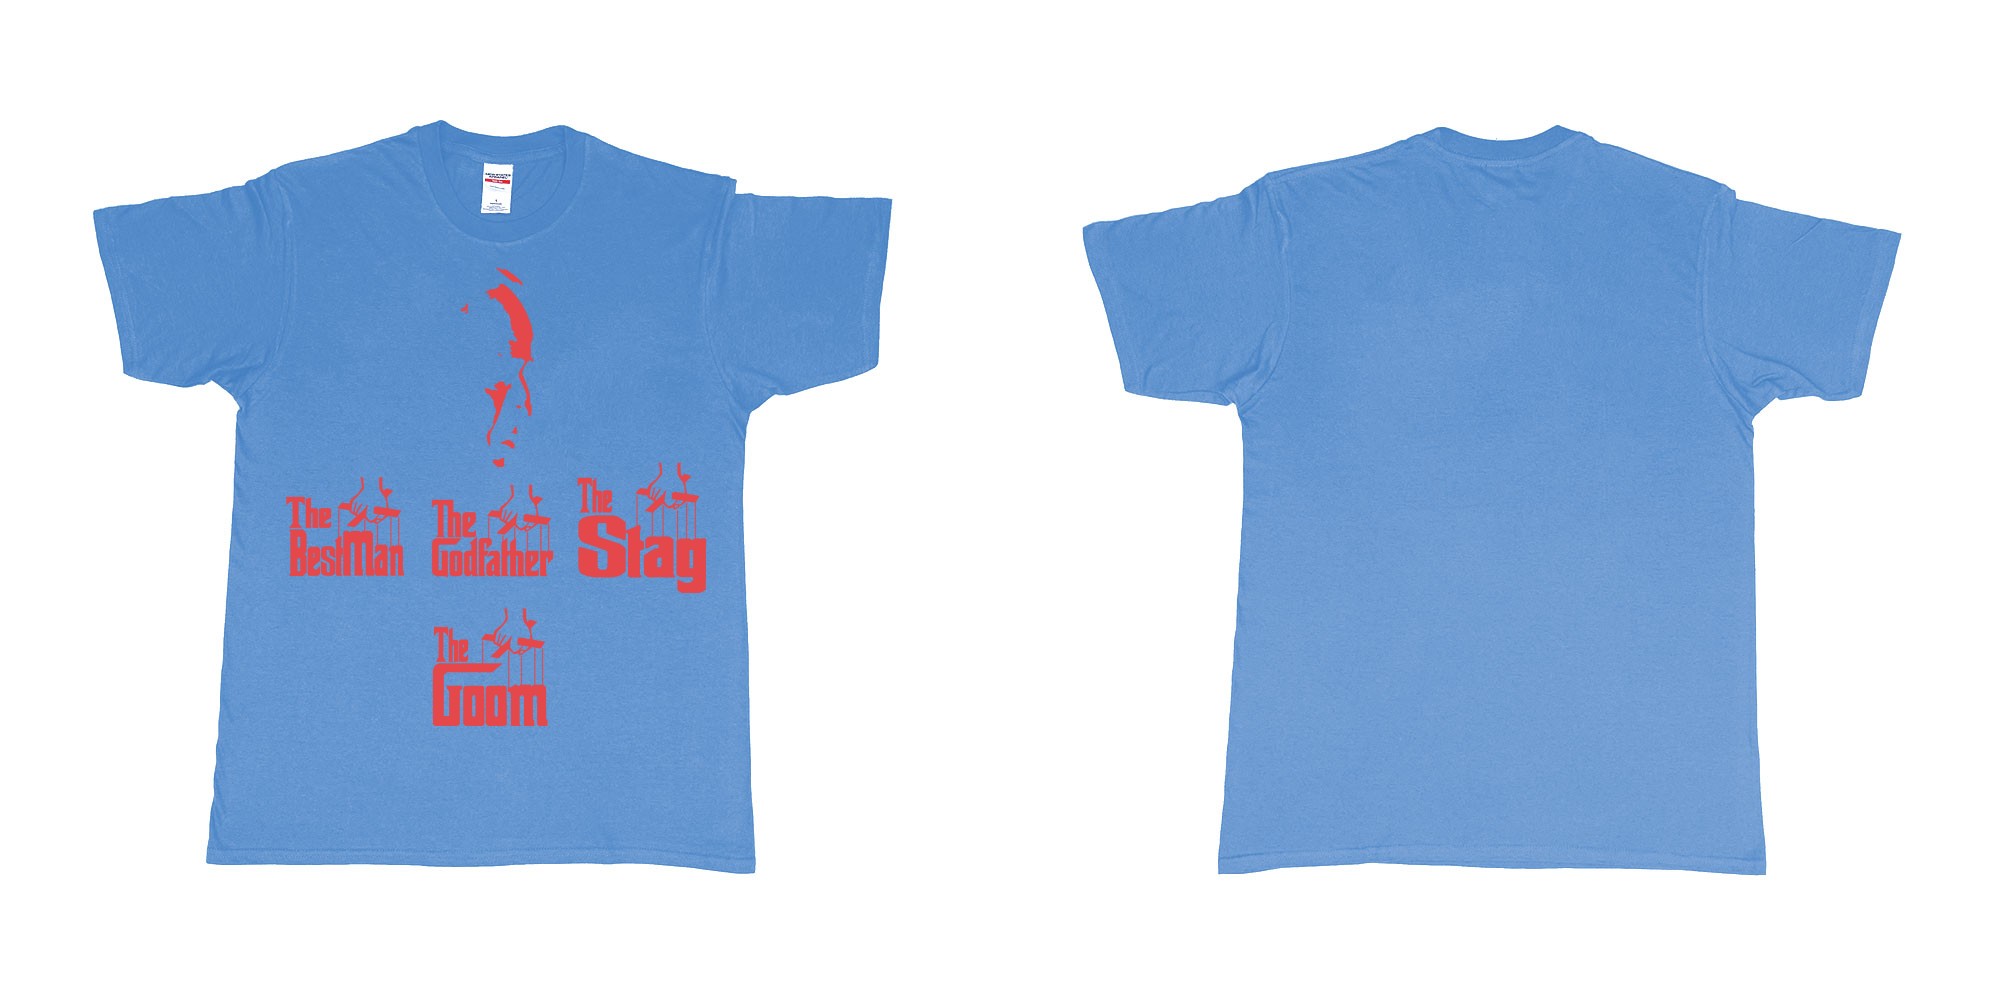 Custom tshirt design TPW the godfather in fabric color carolina-blue choice your own text made in Bali by The Pirate Way